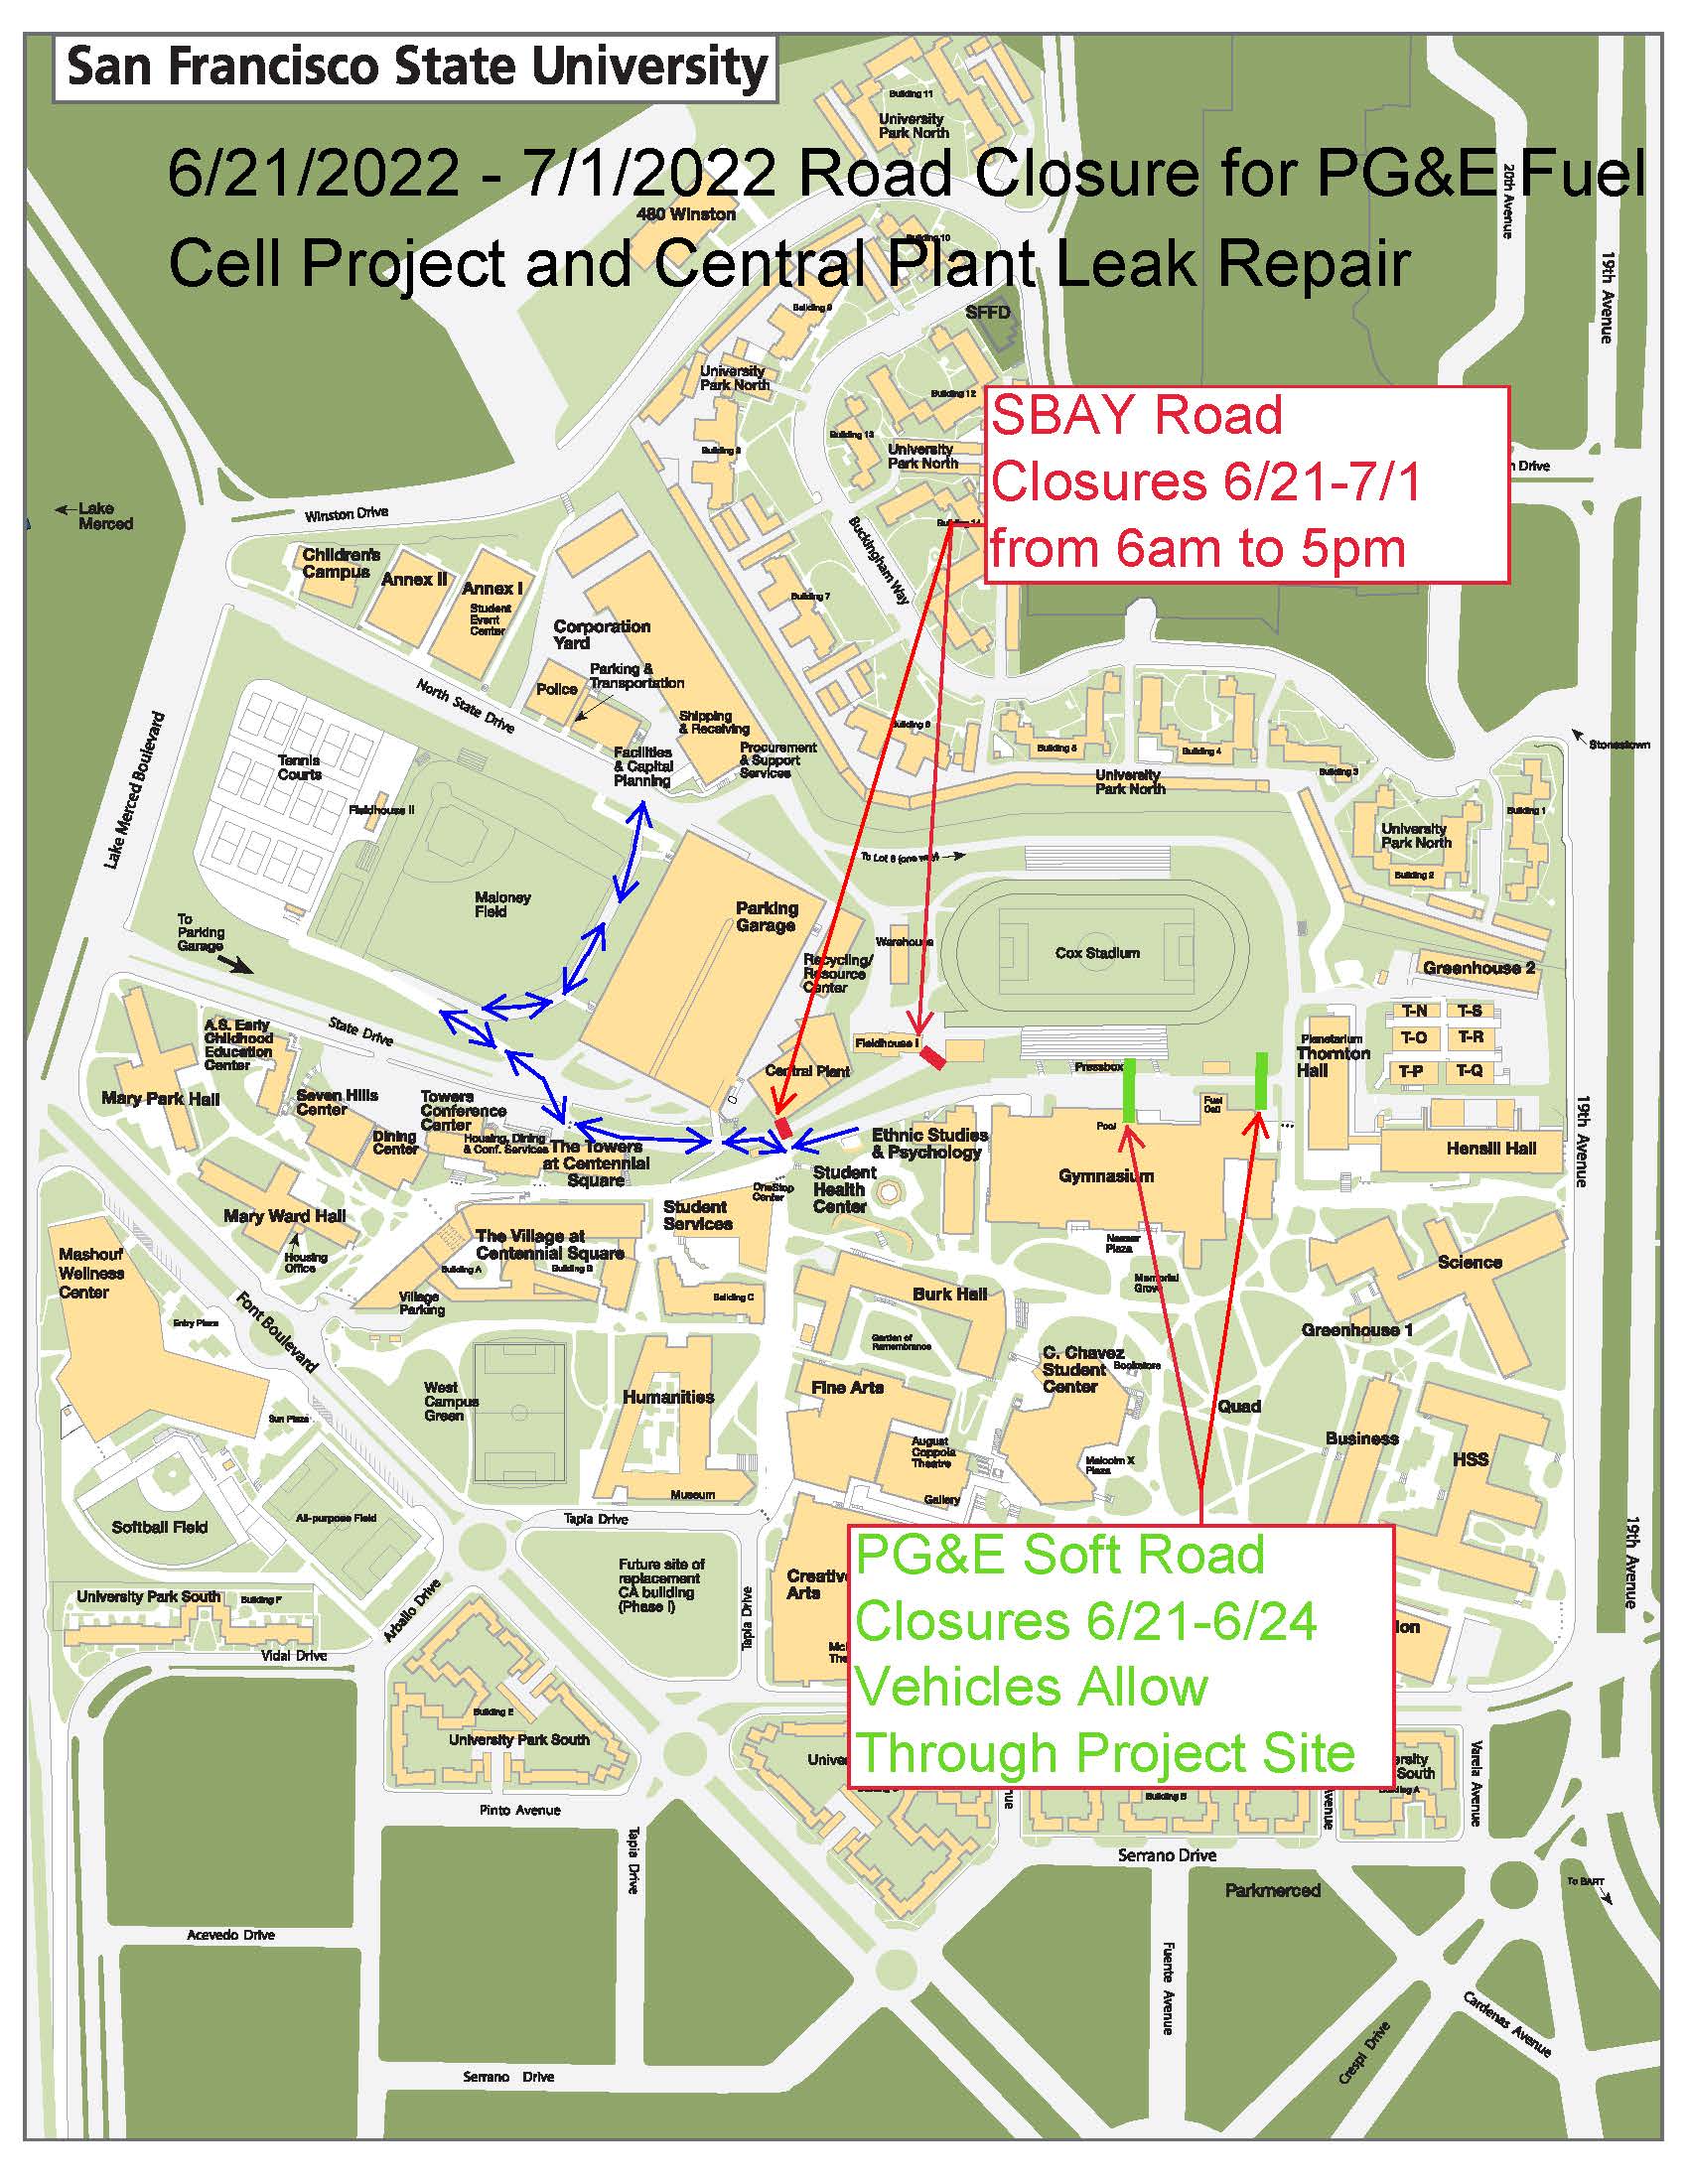 As an alternate route back to the Corporation Yard, staff can use the Maloney Field road located between Maloney Field and the west side of the Campus Parking Garage